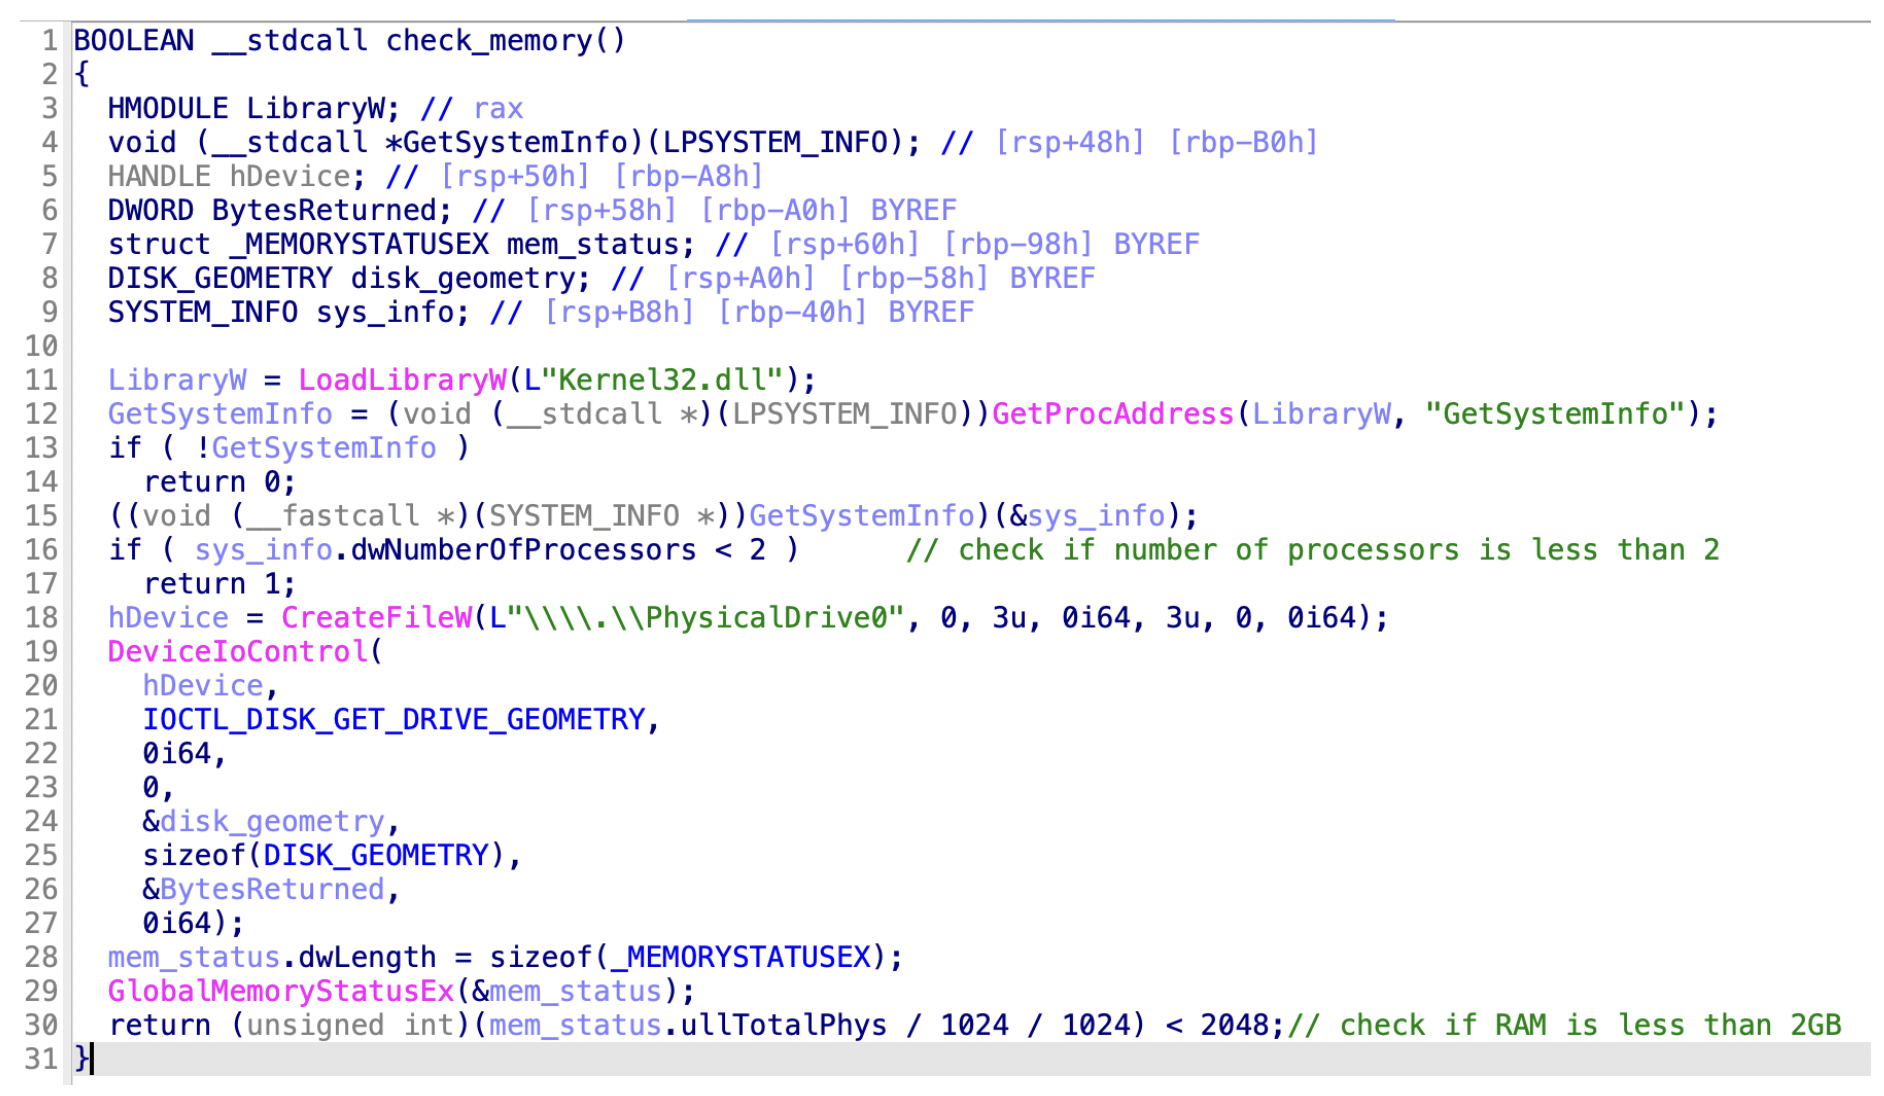 Image 10 is a screenshot of many lines of code where the malware is checking if there are more than two processors available, and also checks memory availability. This allows the malware to see whether the target system is a desktop PC or is running inside a sandbox.